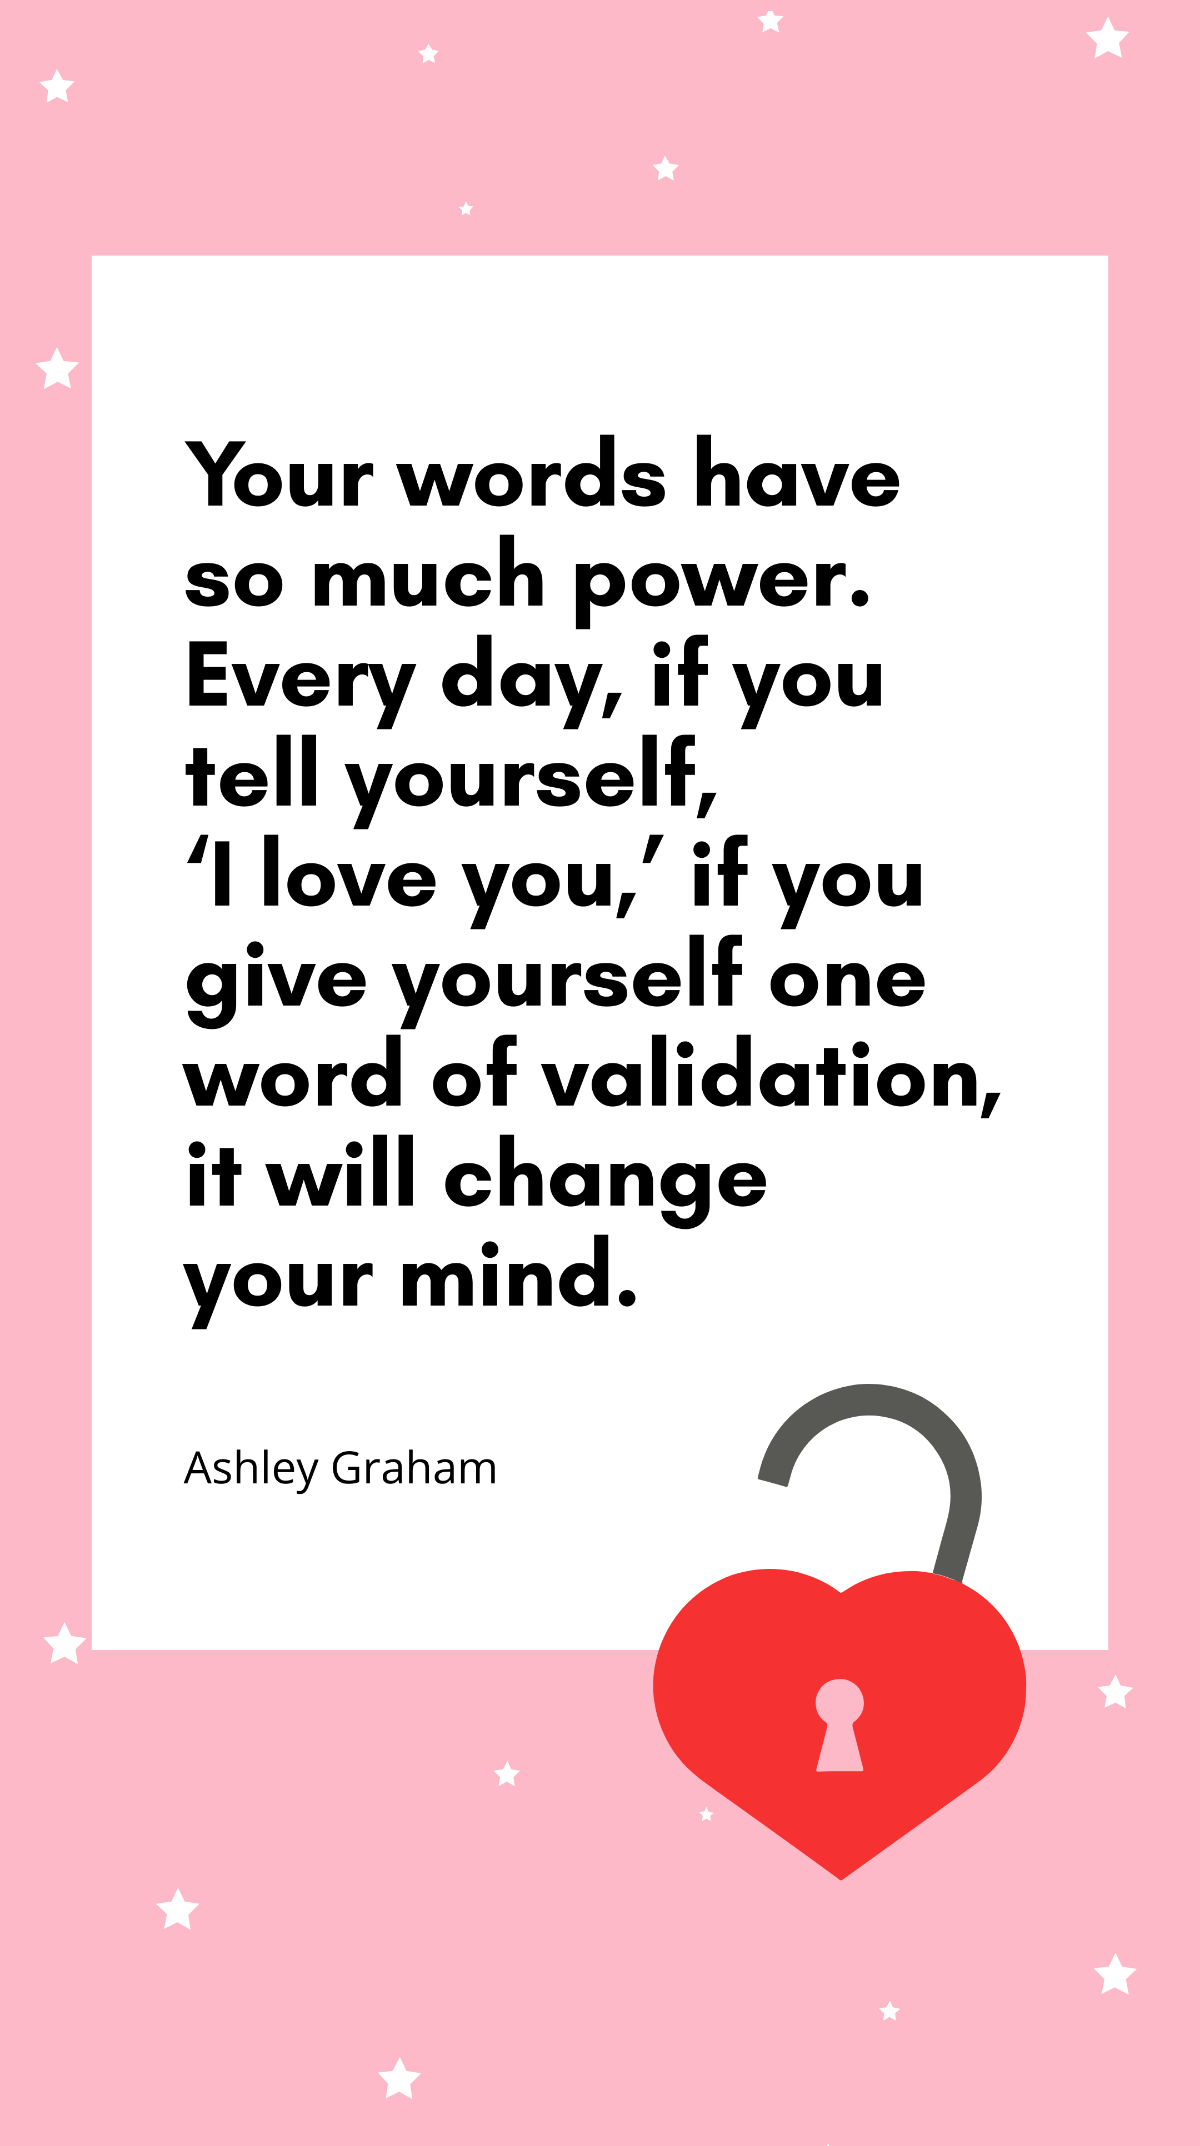 Ashley Graham - Your words have so much power. Every day, if you tell yourself, ‘I love you,’ if you give yourself one word of validation, it will change your mind. Template